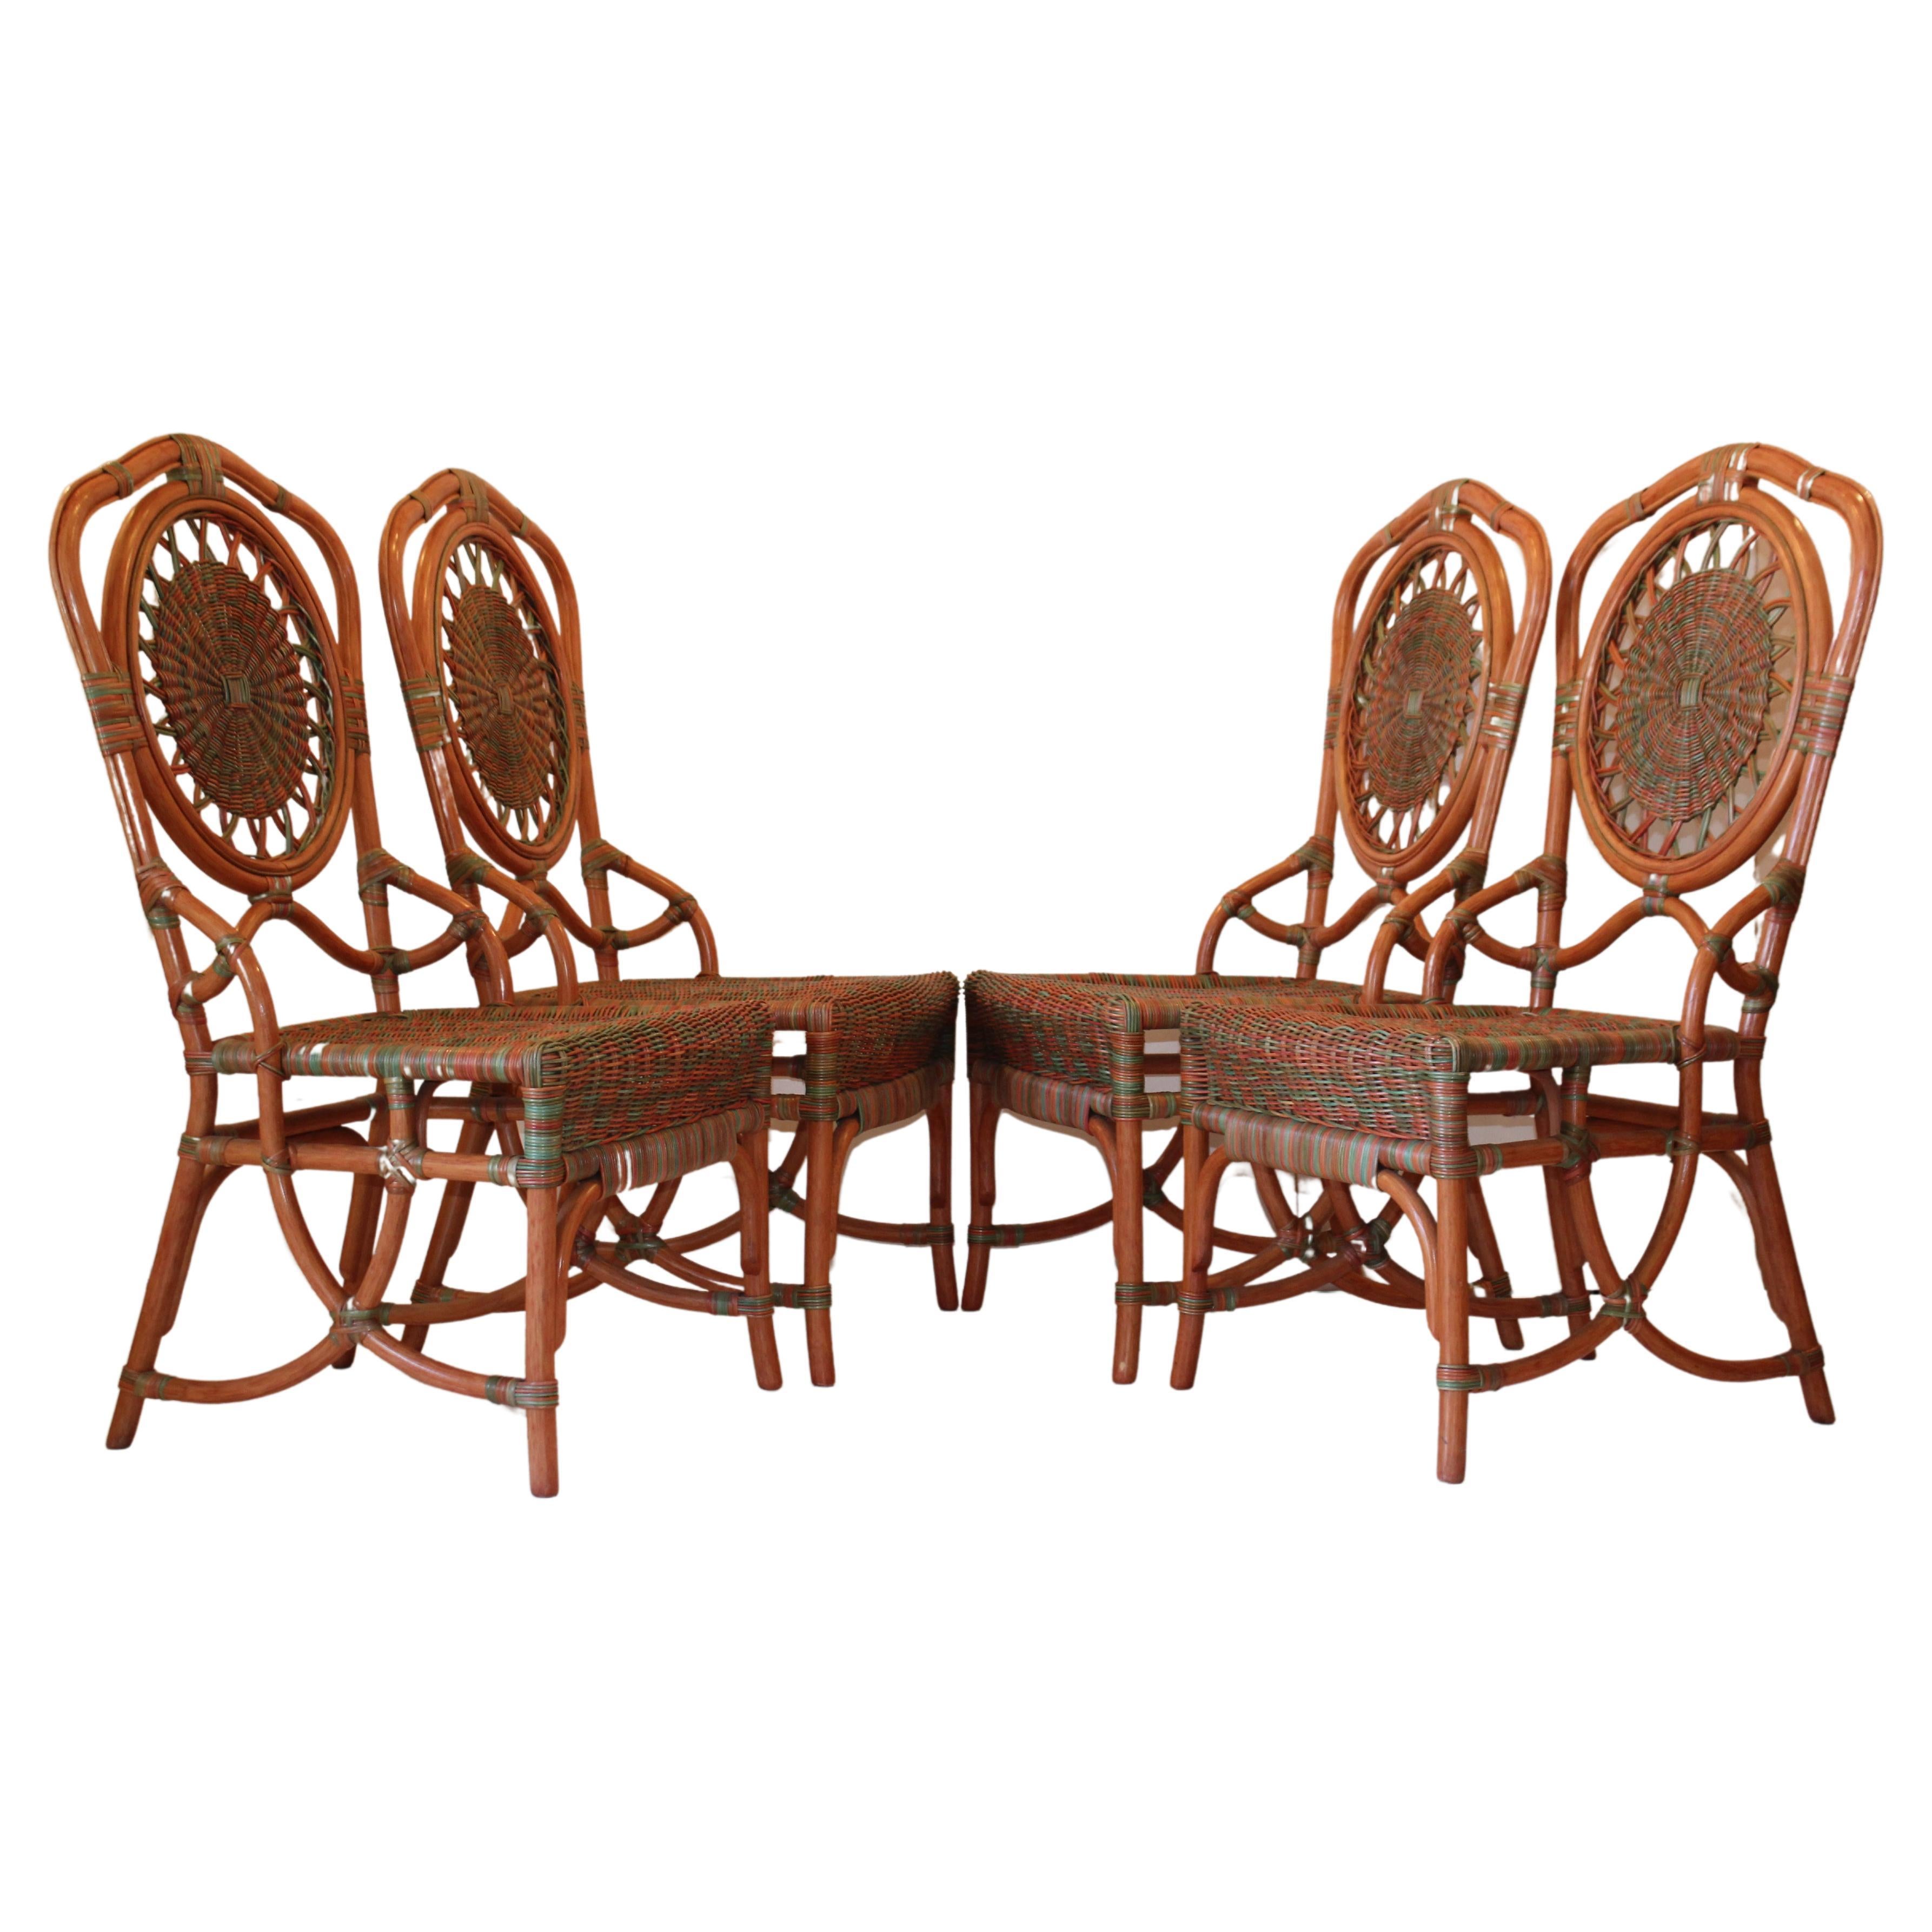 Vintage Rattan Chairs, Set of Four, Italy 1960s